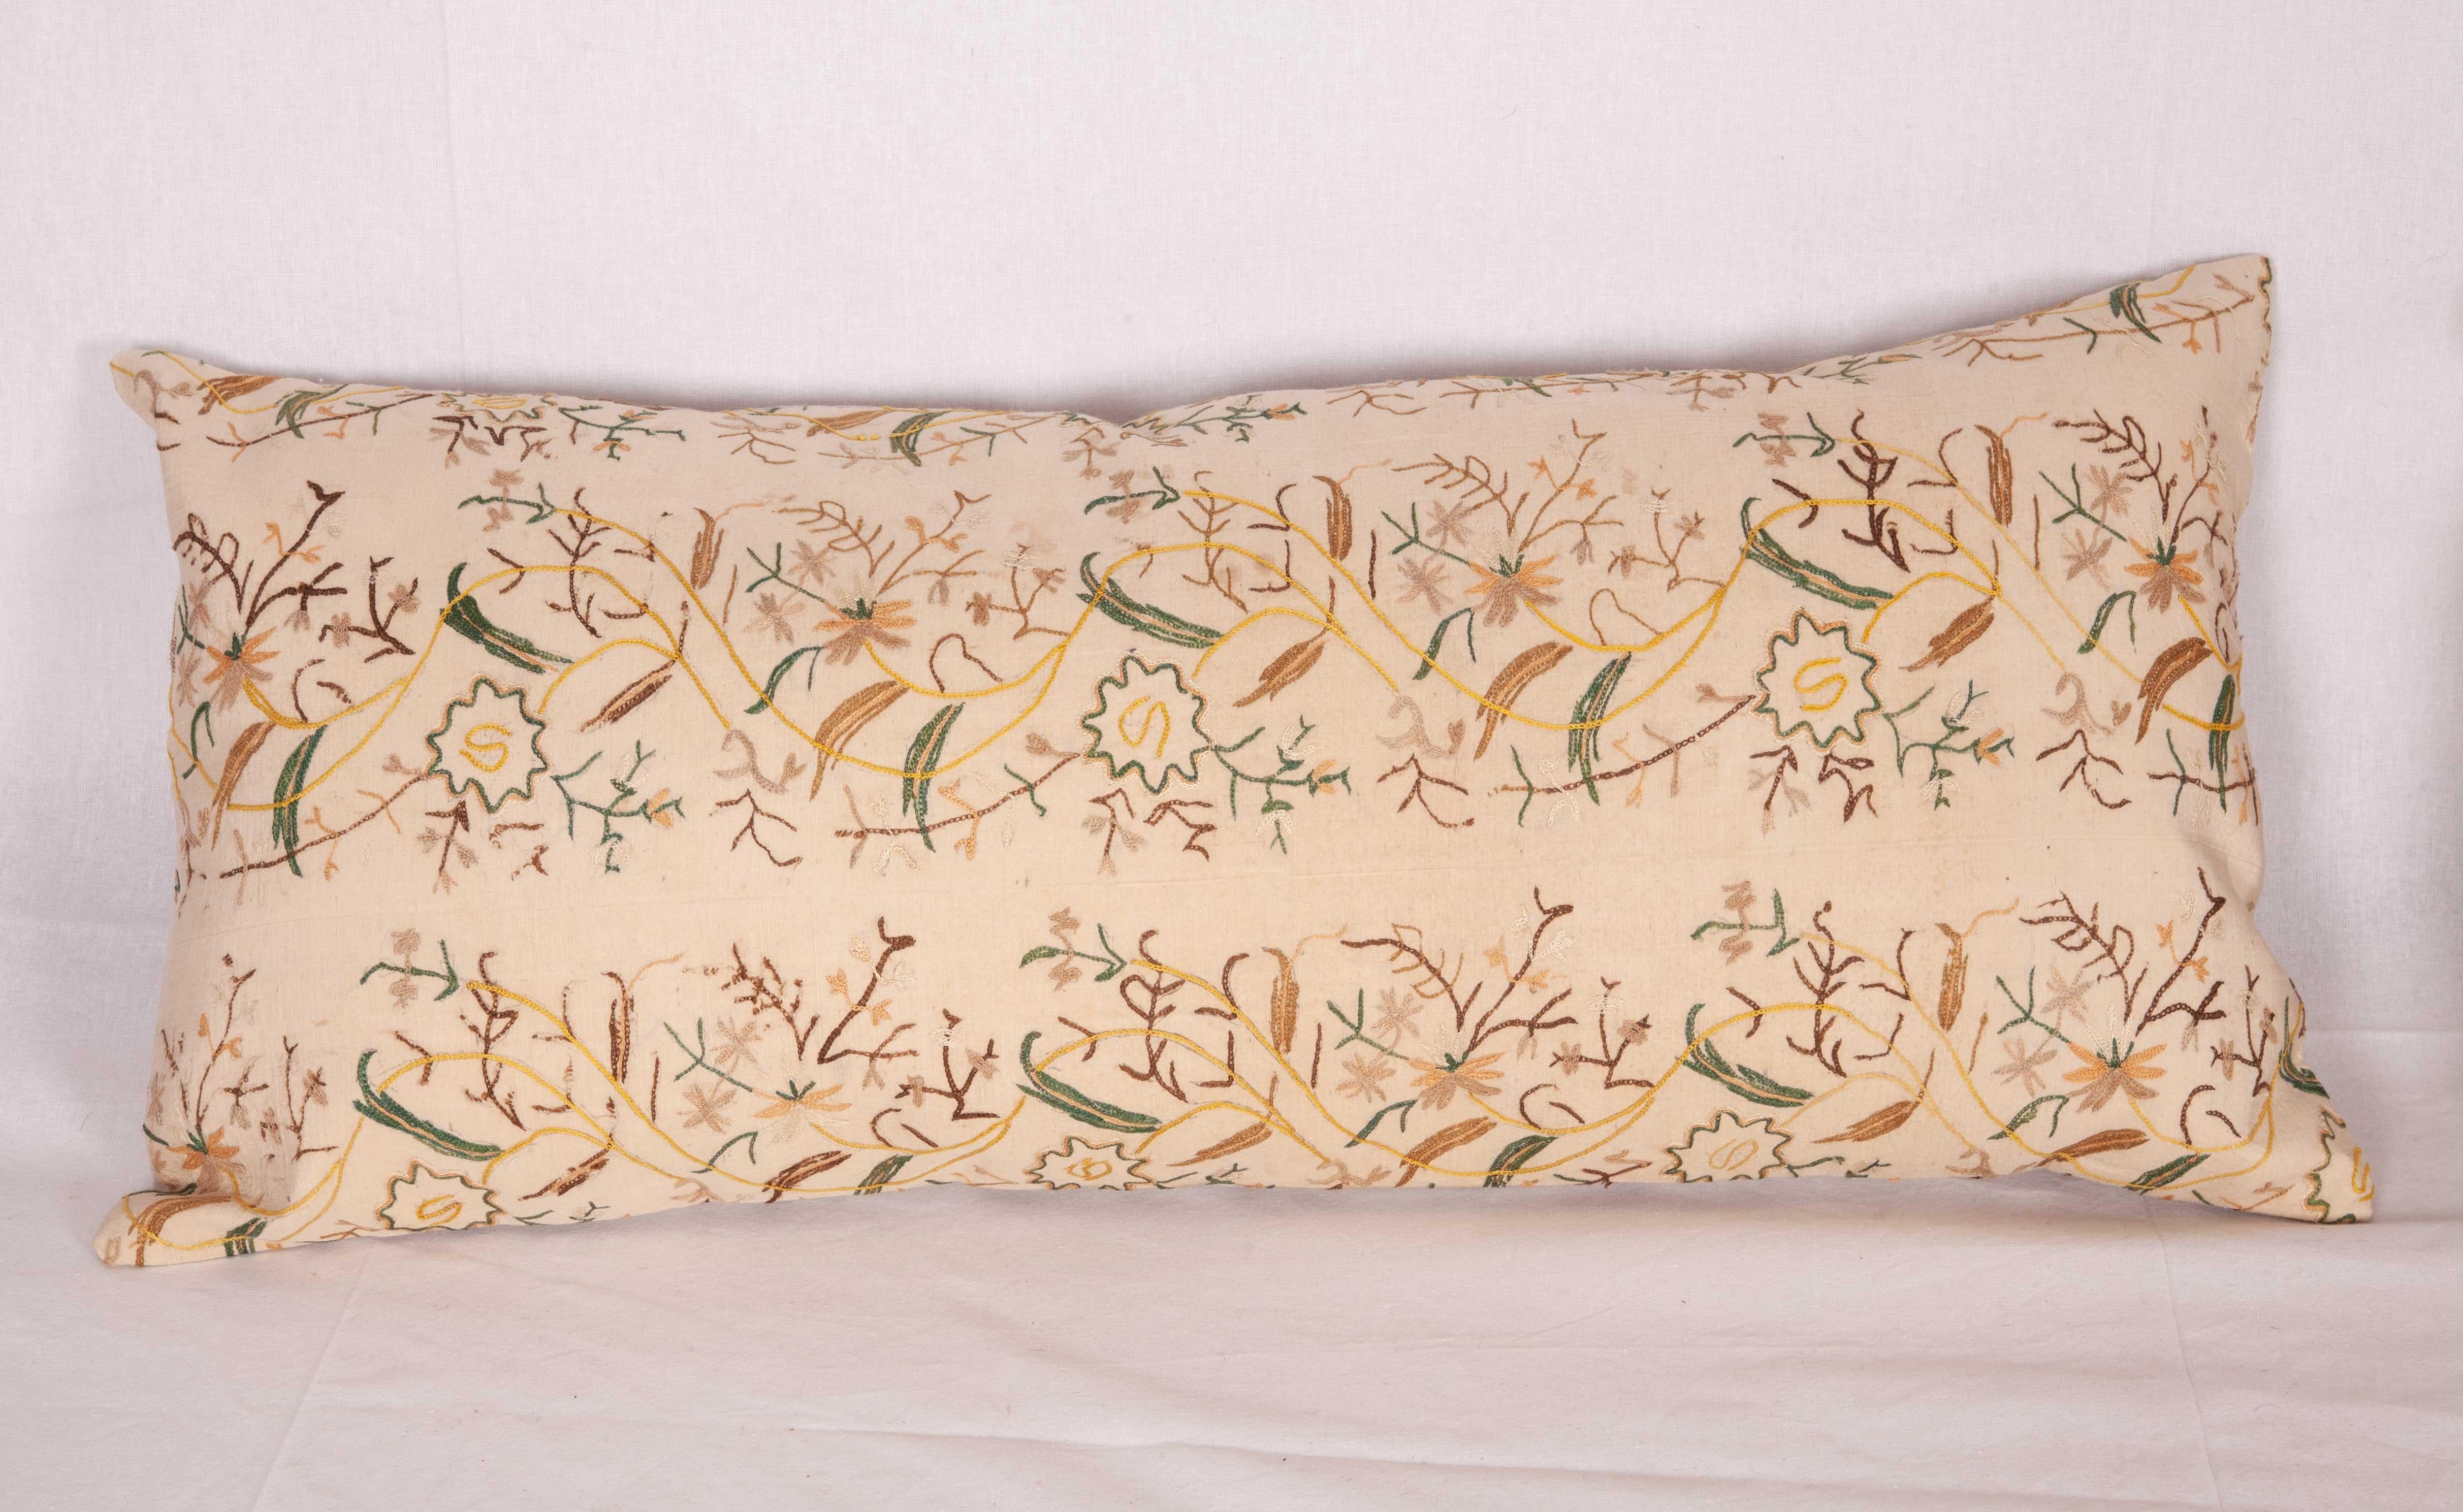 Suzani Pillow Cases fashioned from a 19th Century Ottoman Embroidery